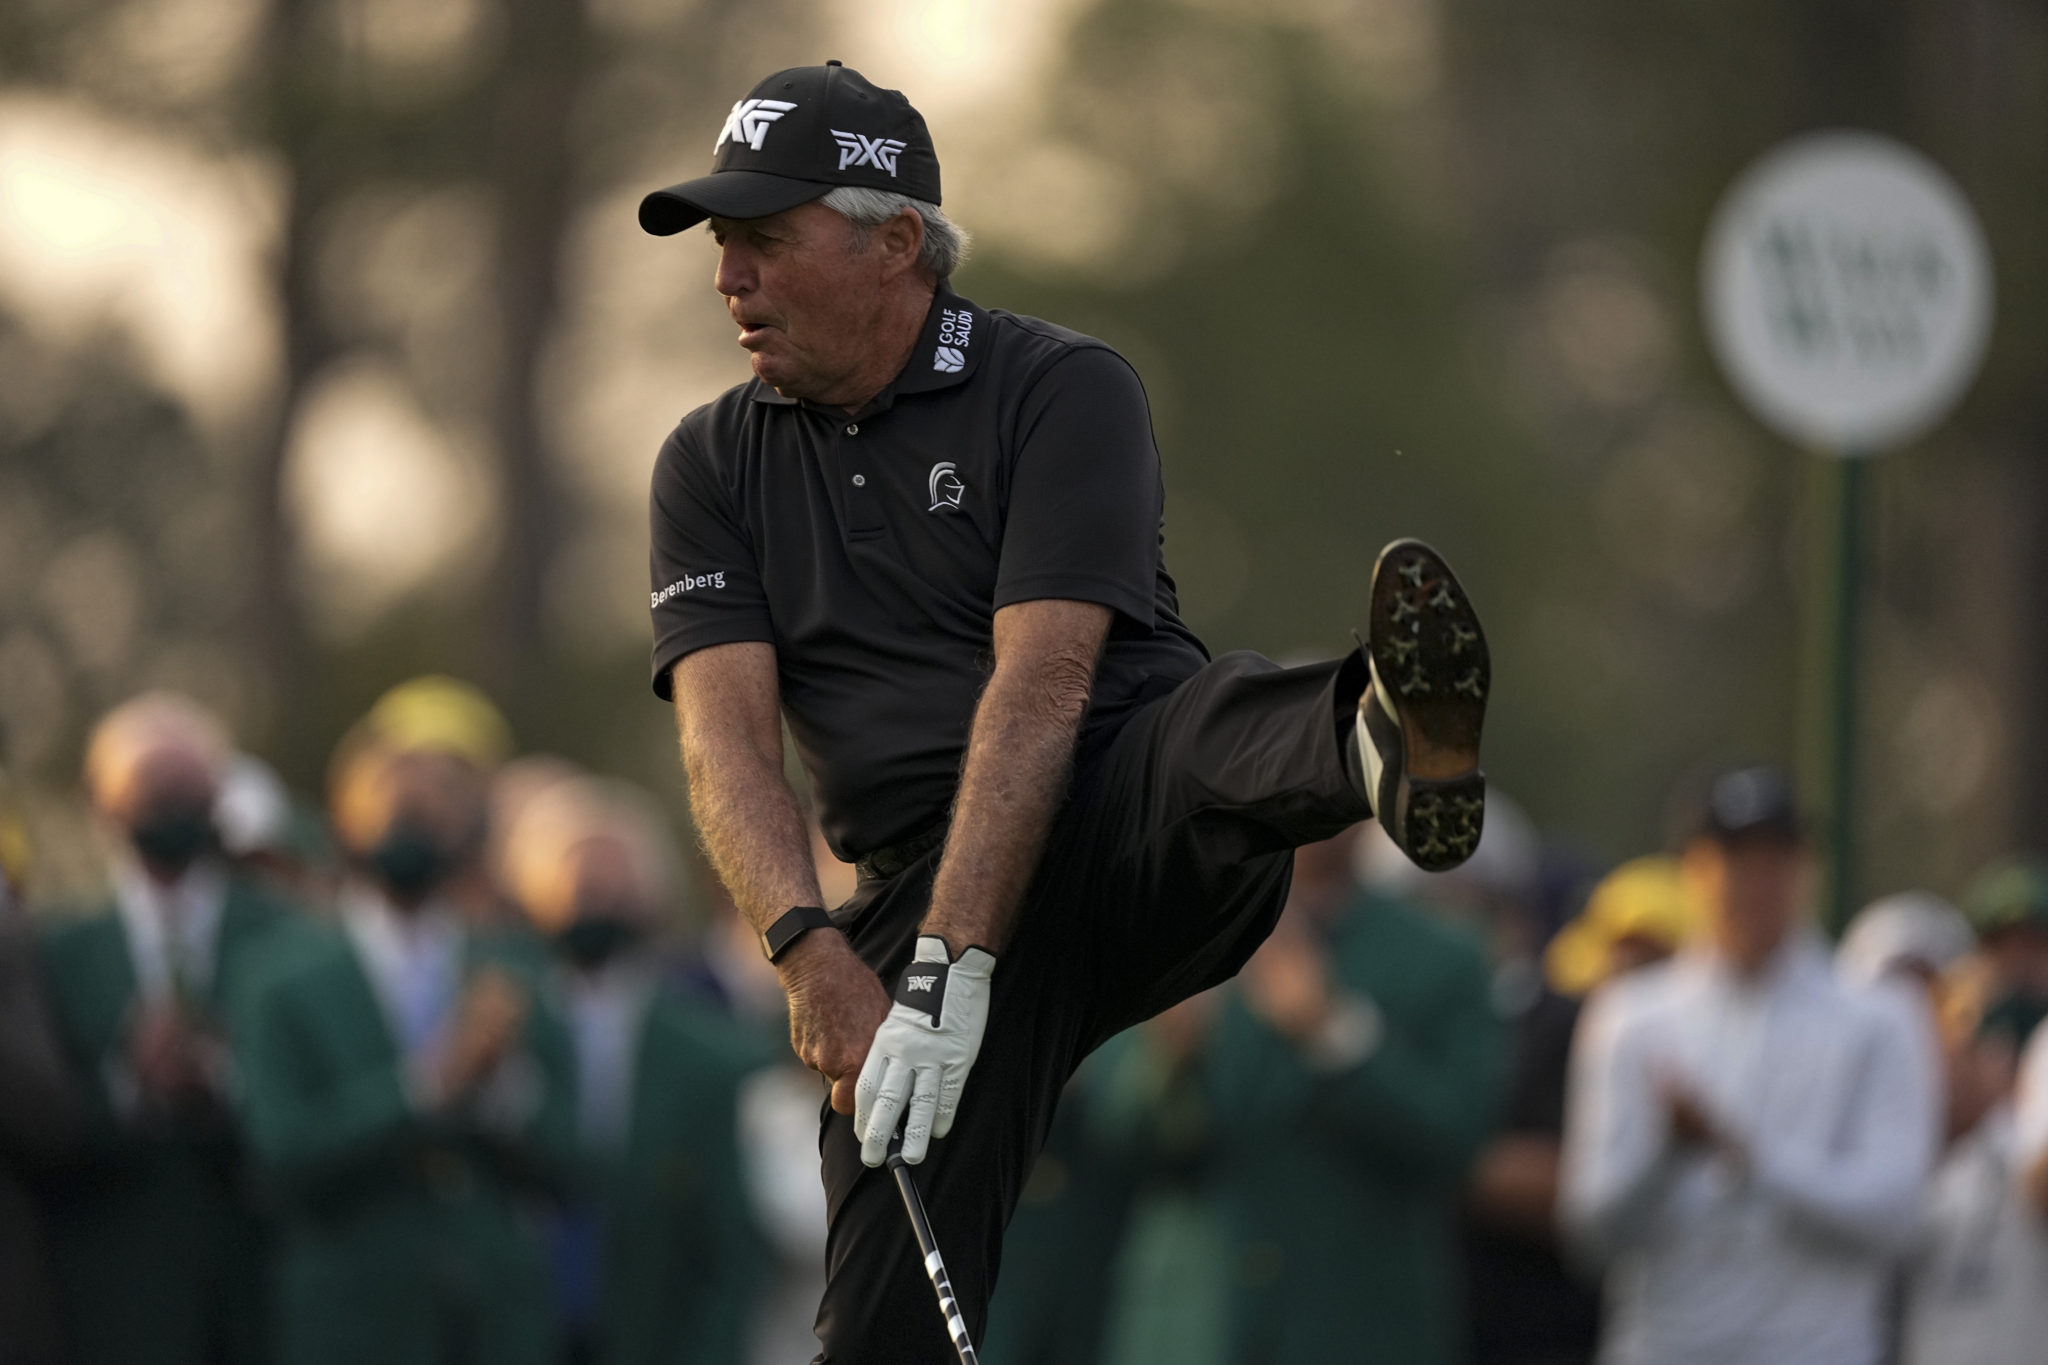 REPORTS Son of Gary Player banned from the Masters for golf ball stunt